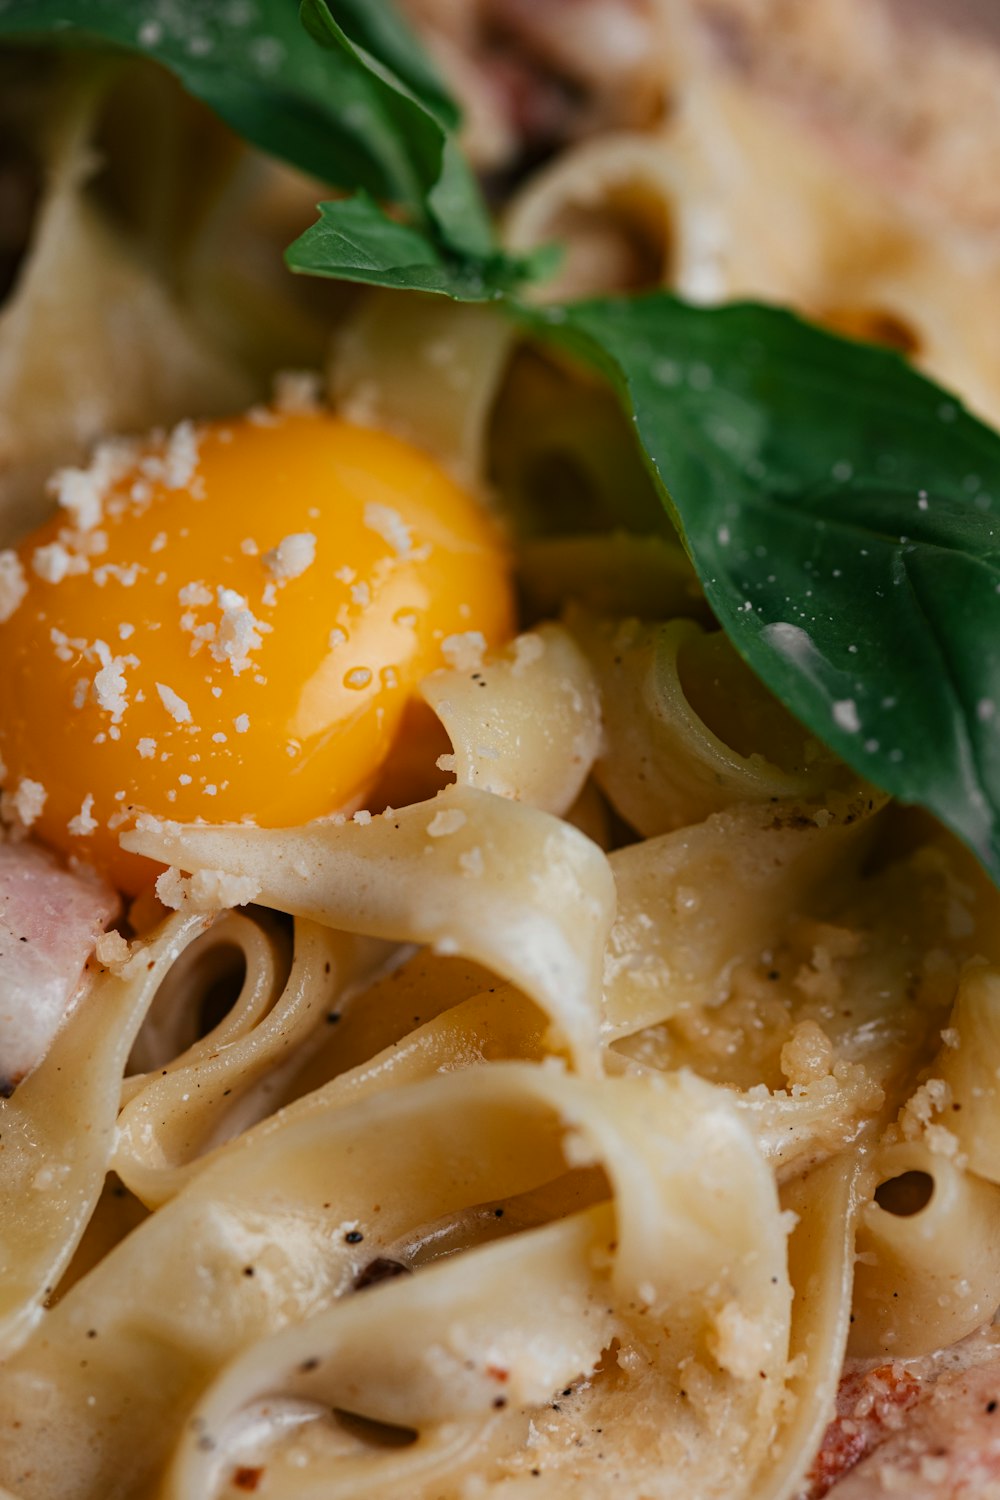 a close up of a plate of food with pasta and an orange